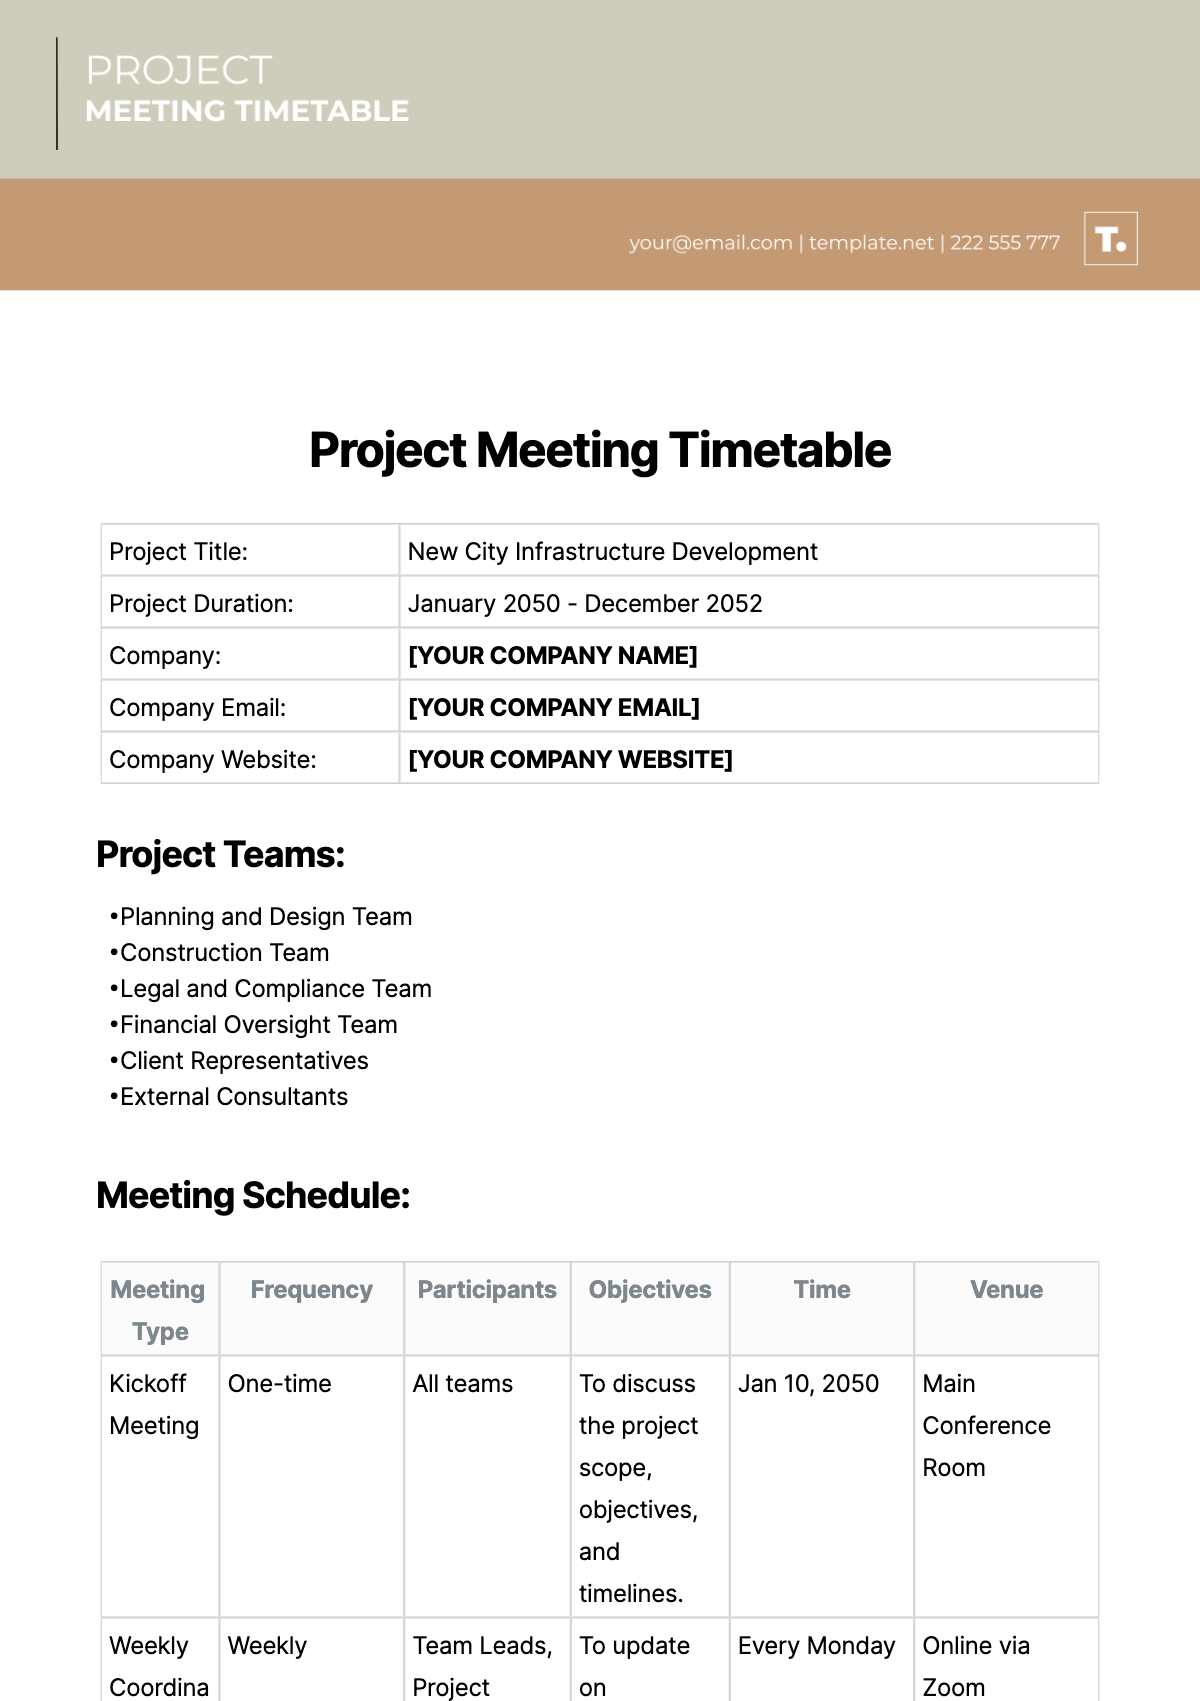 Free Project Meeting Timetable Template